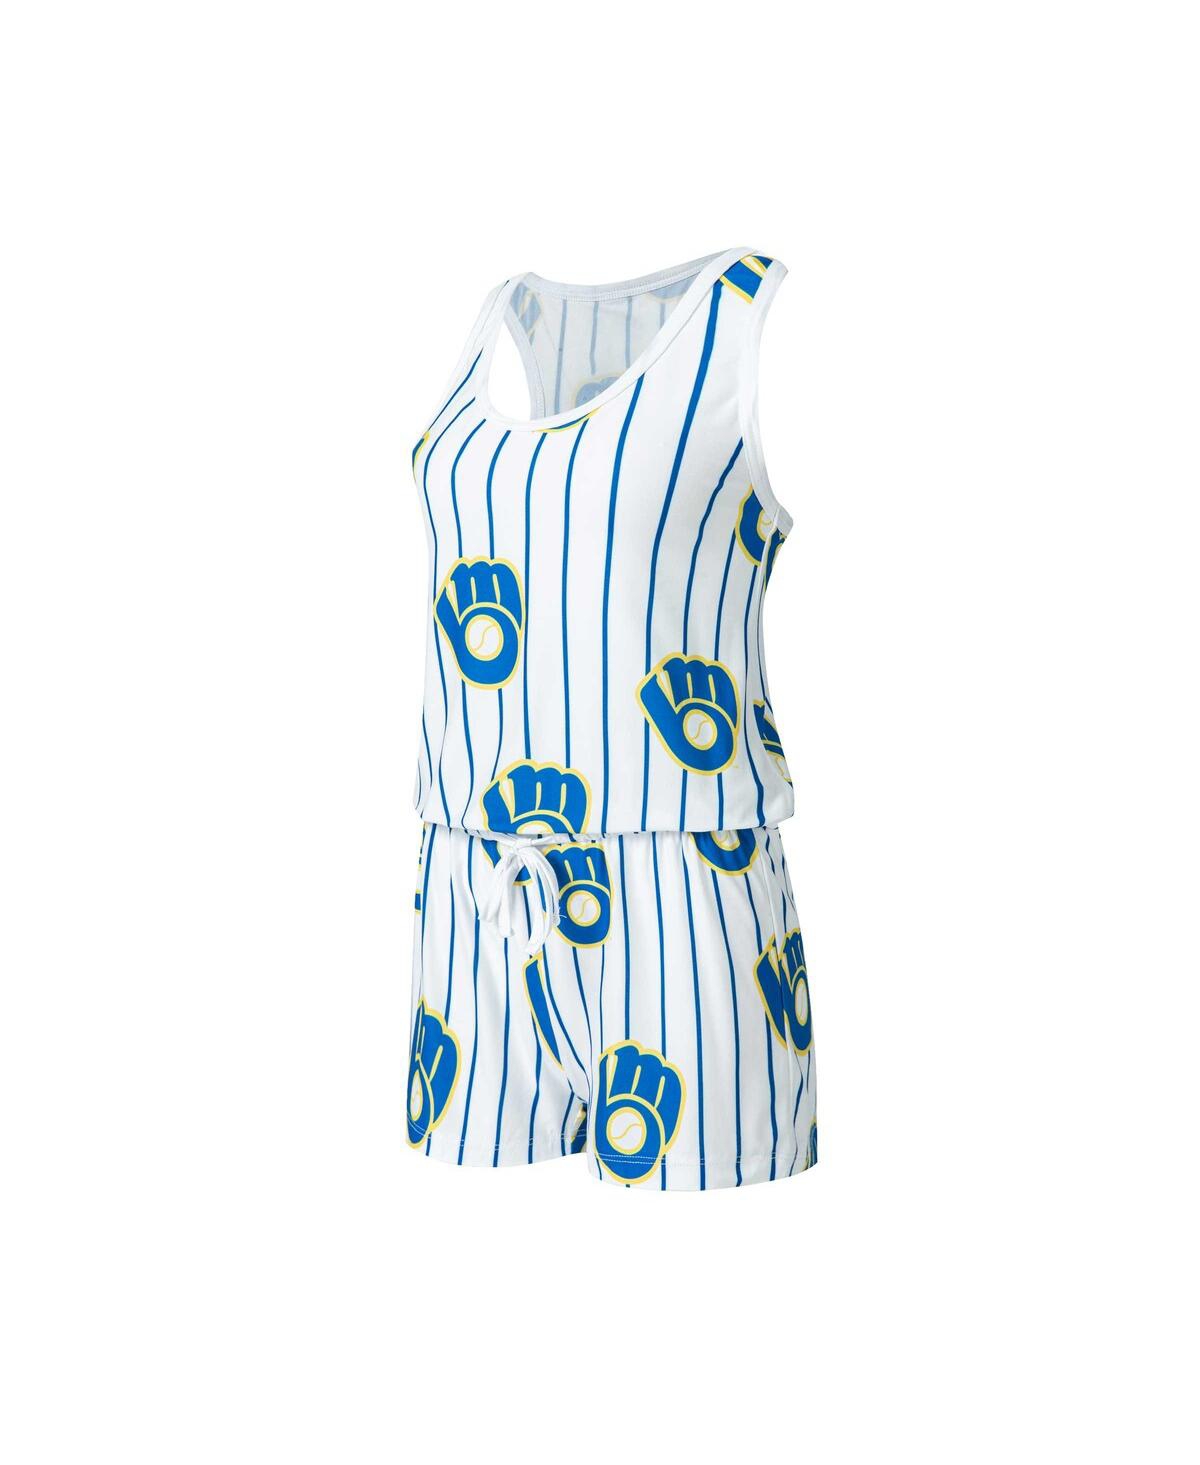 Women's Concepts Sport White Milwaukee Brewers Reel Pinstripe Knit Romper - White